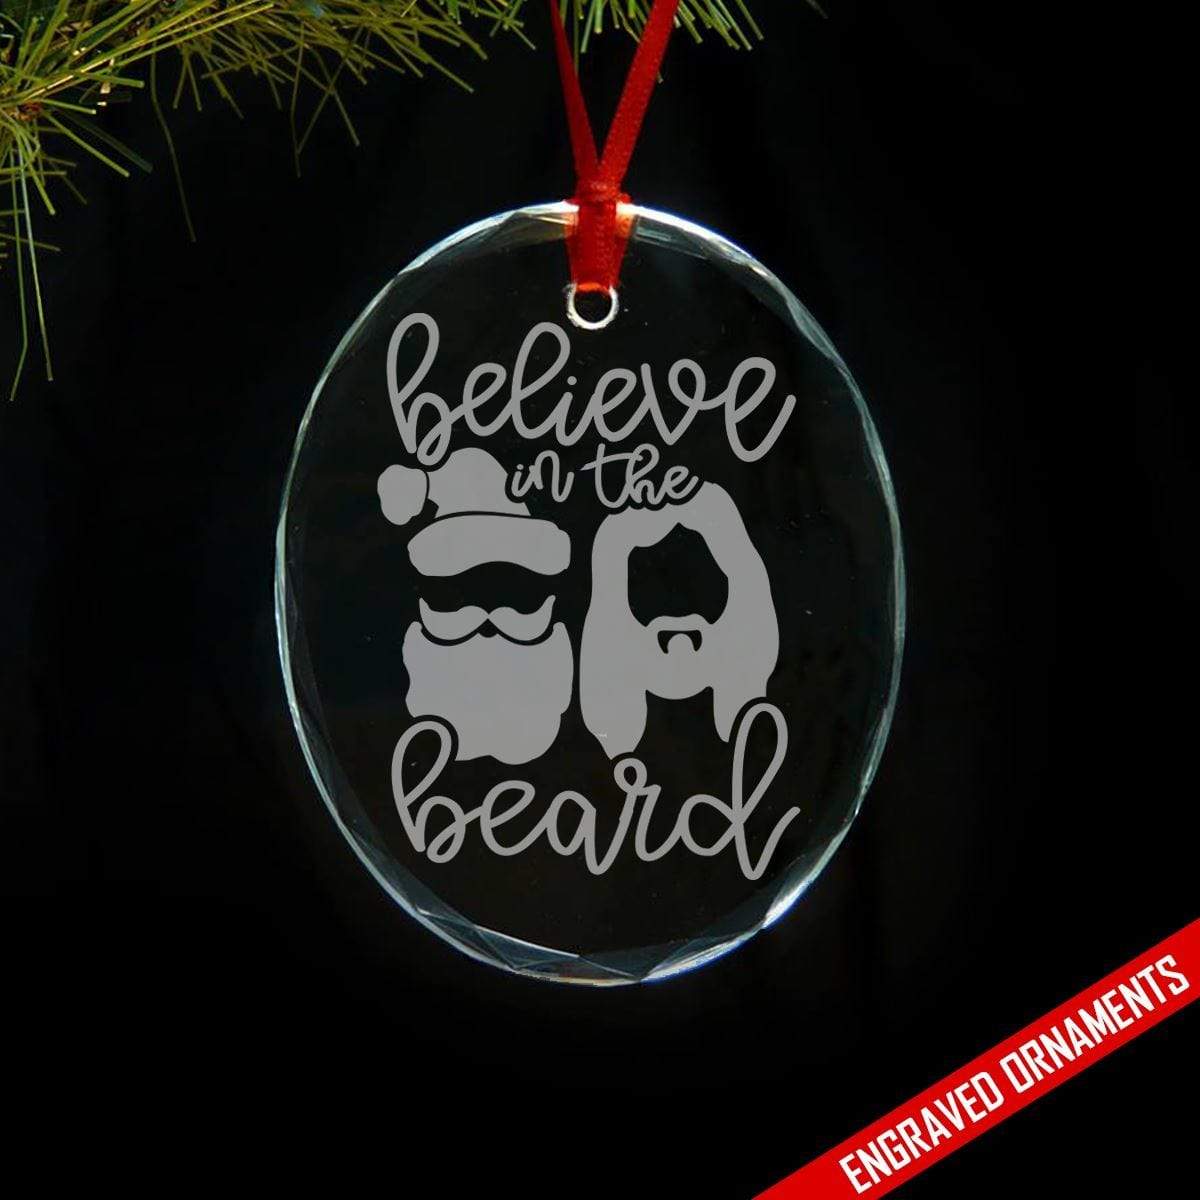 Believe In The Beard Premium Engraved Glass Ornament ZLAZER Circle Ornament 